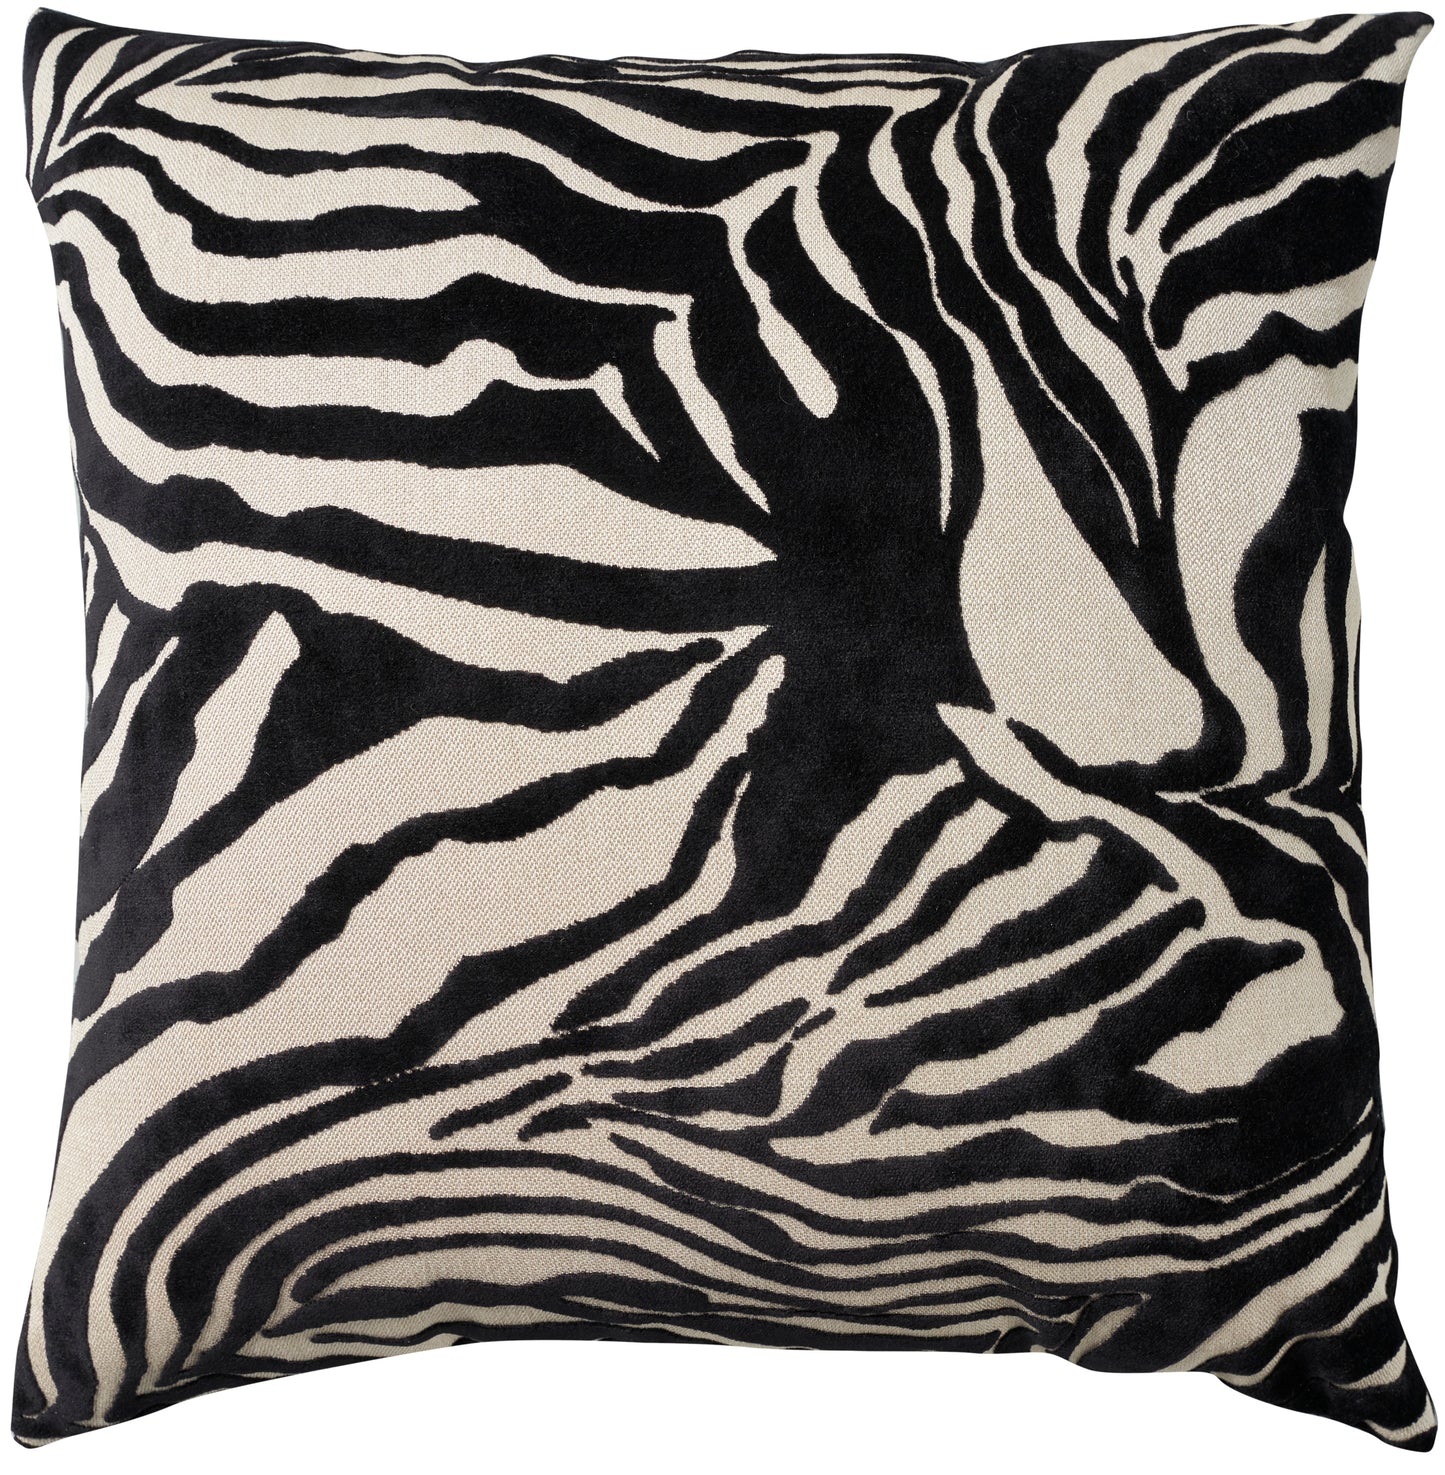 Sofia L3028 Synthetic Blend Jaquard Zebra Velvet Throw Pillow From Mina Victory By Nourison Rugs